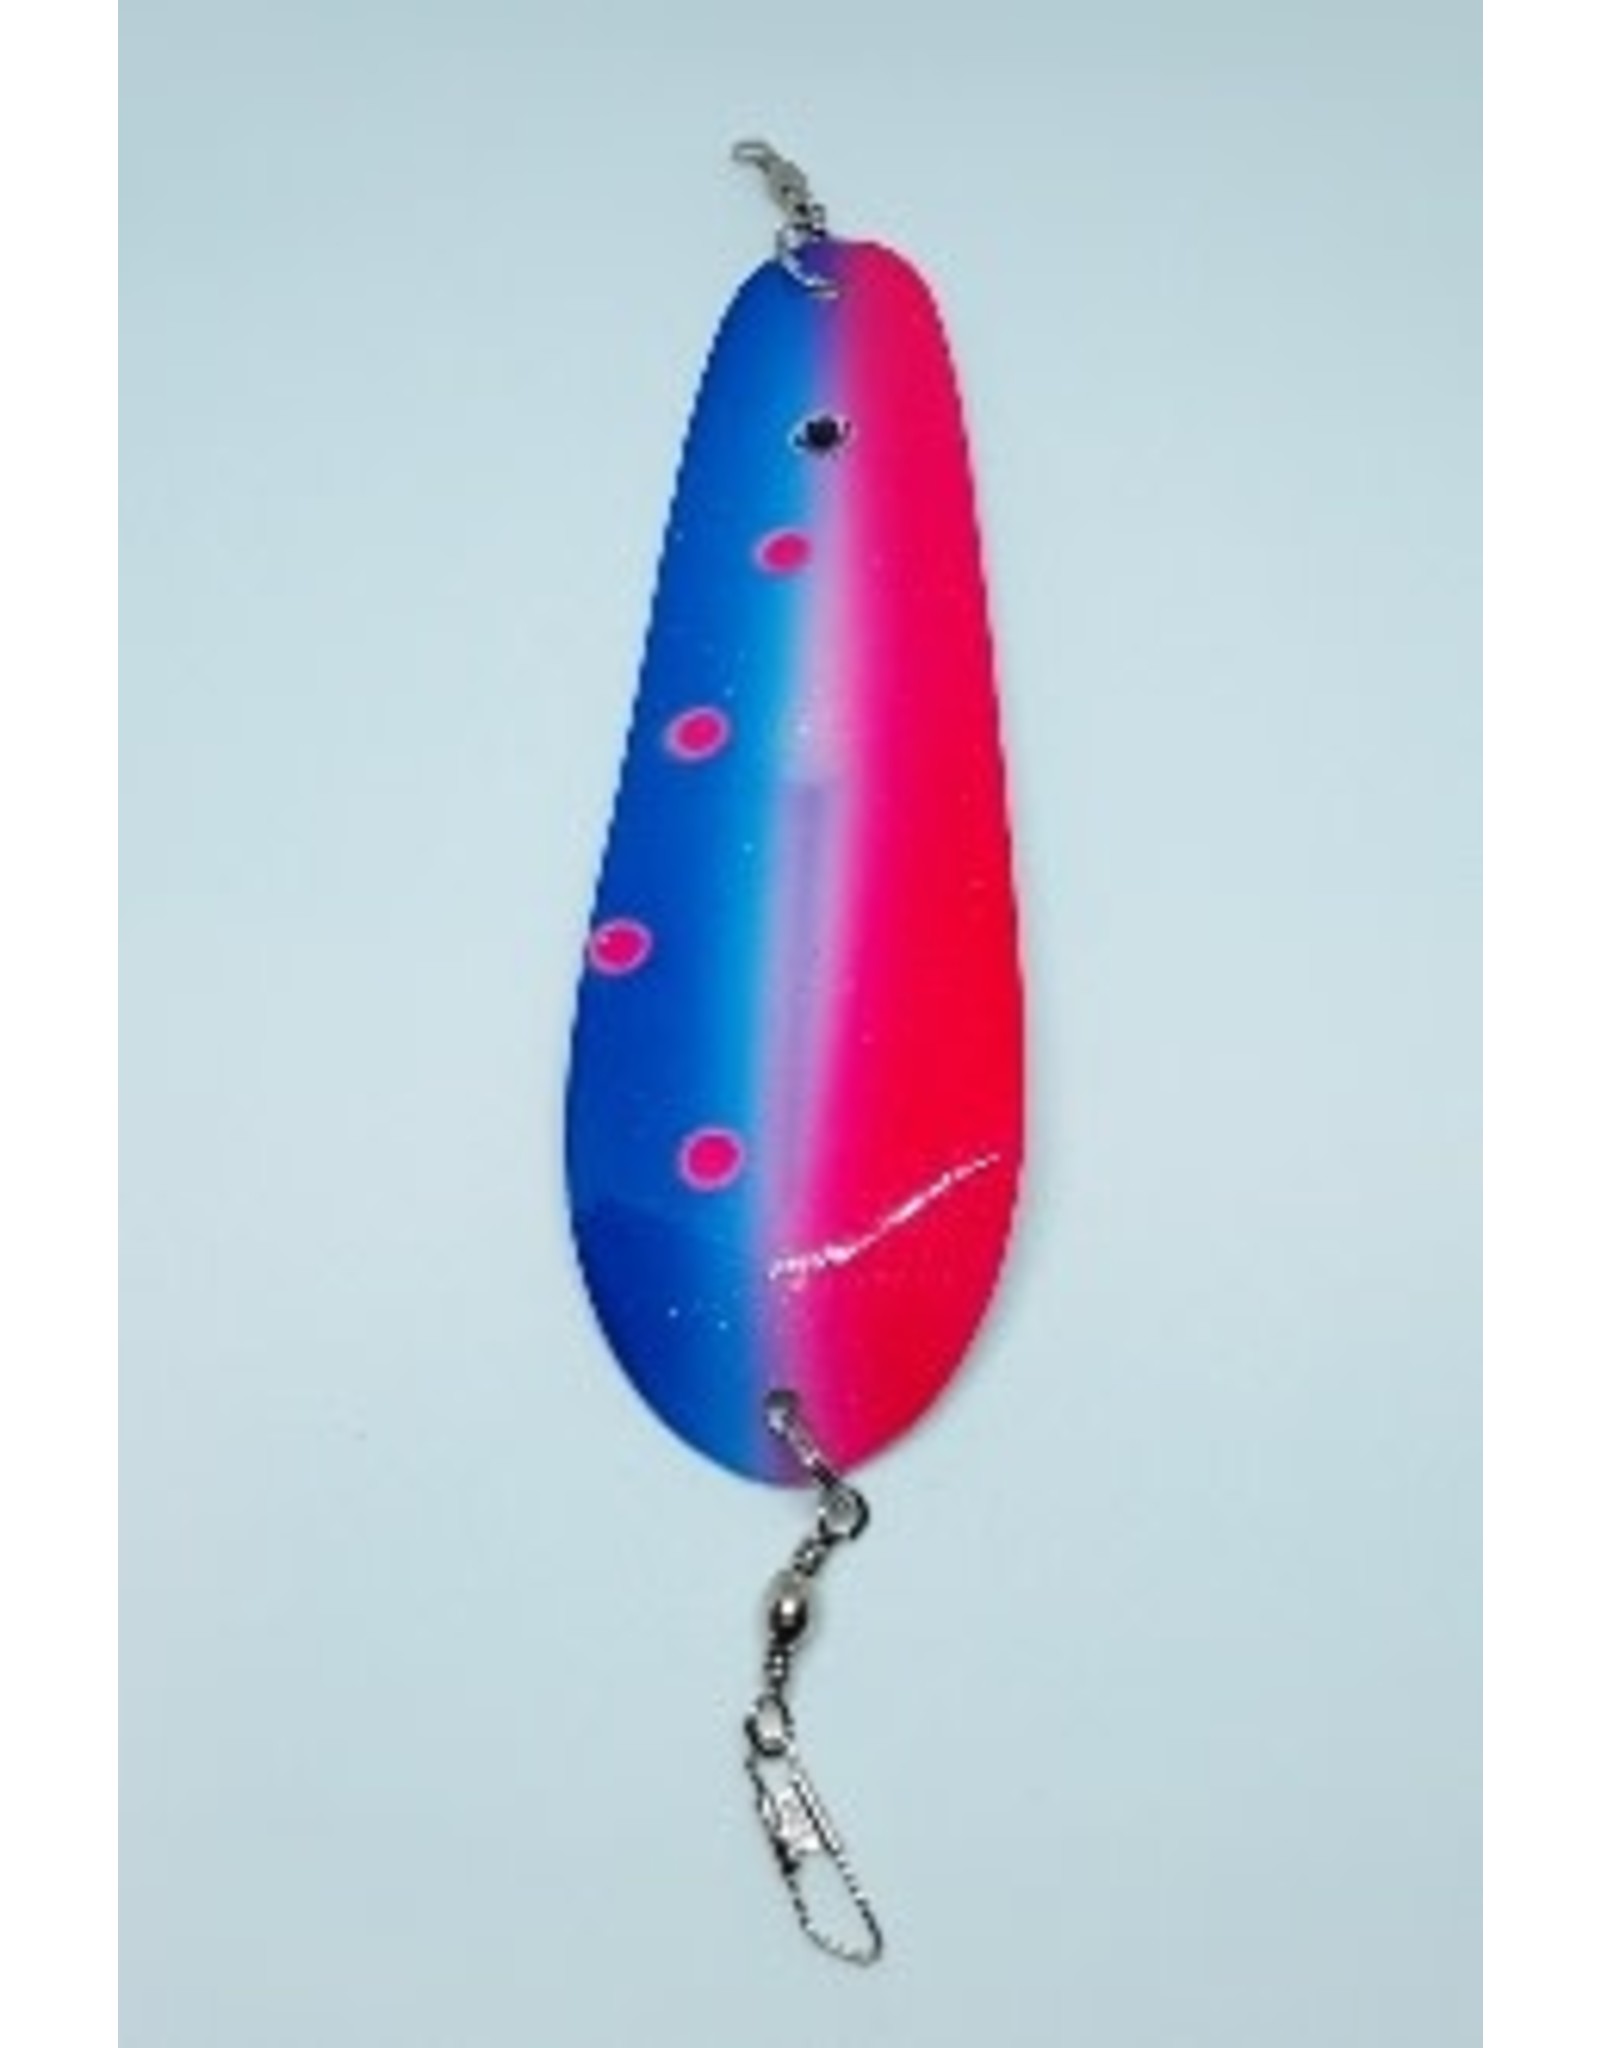 Kokabow Fishing Tackle 3.75 Tail Feather - Electric Blue - Larry's  Sporting Goods